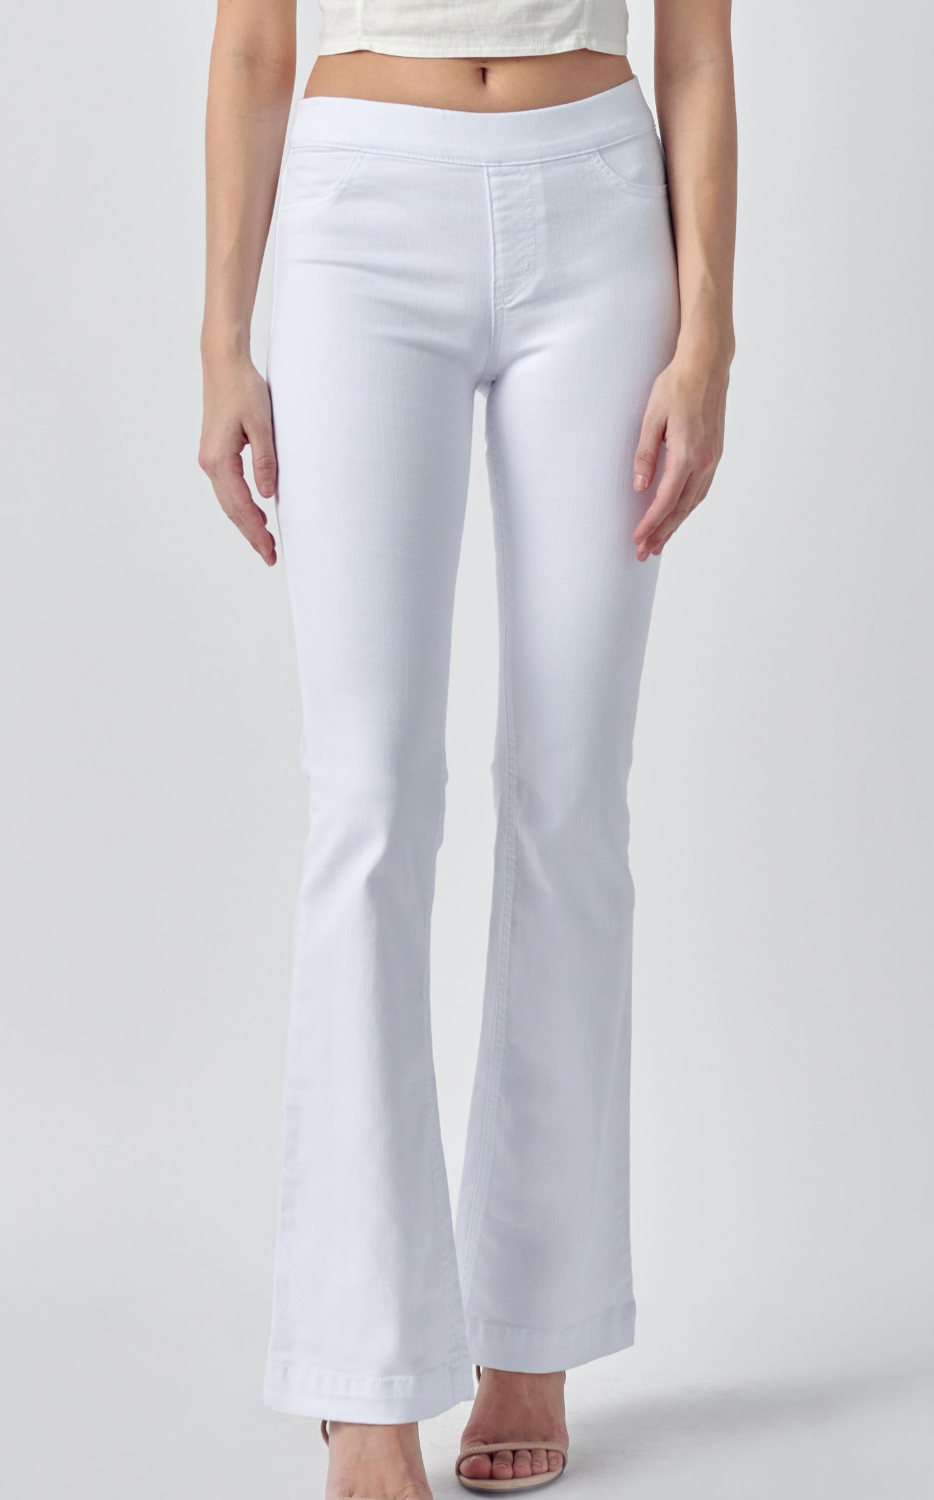 Trixie White Flared Pull On Jeans